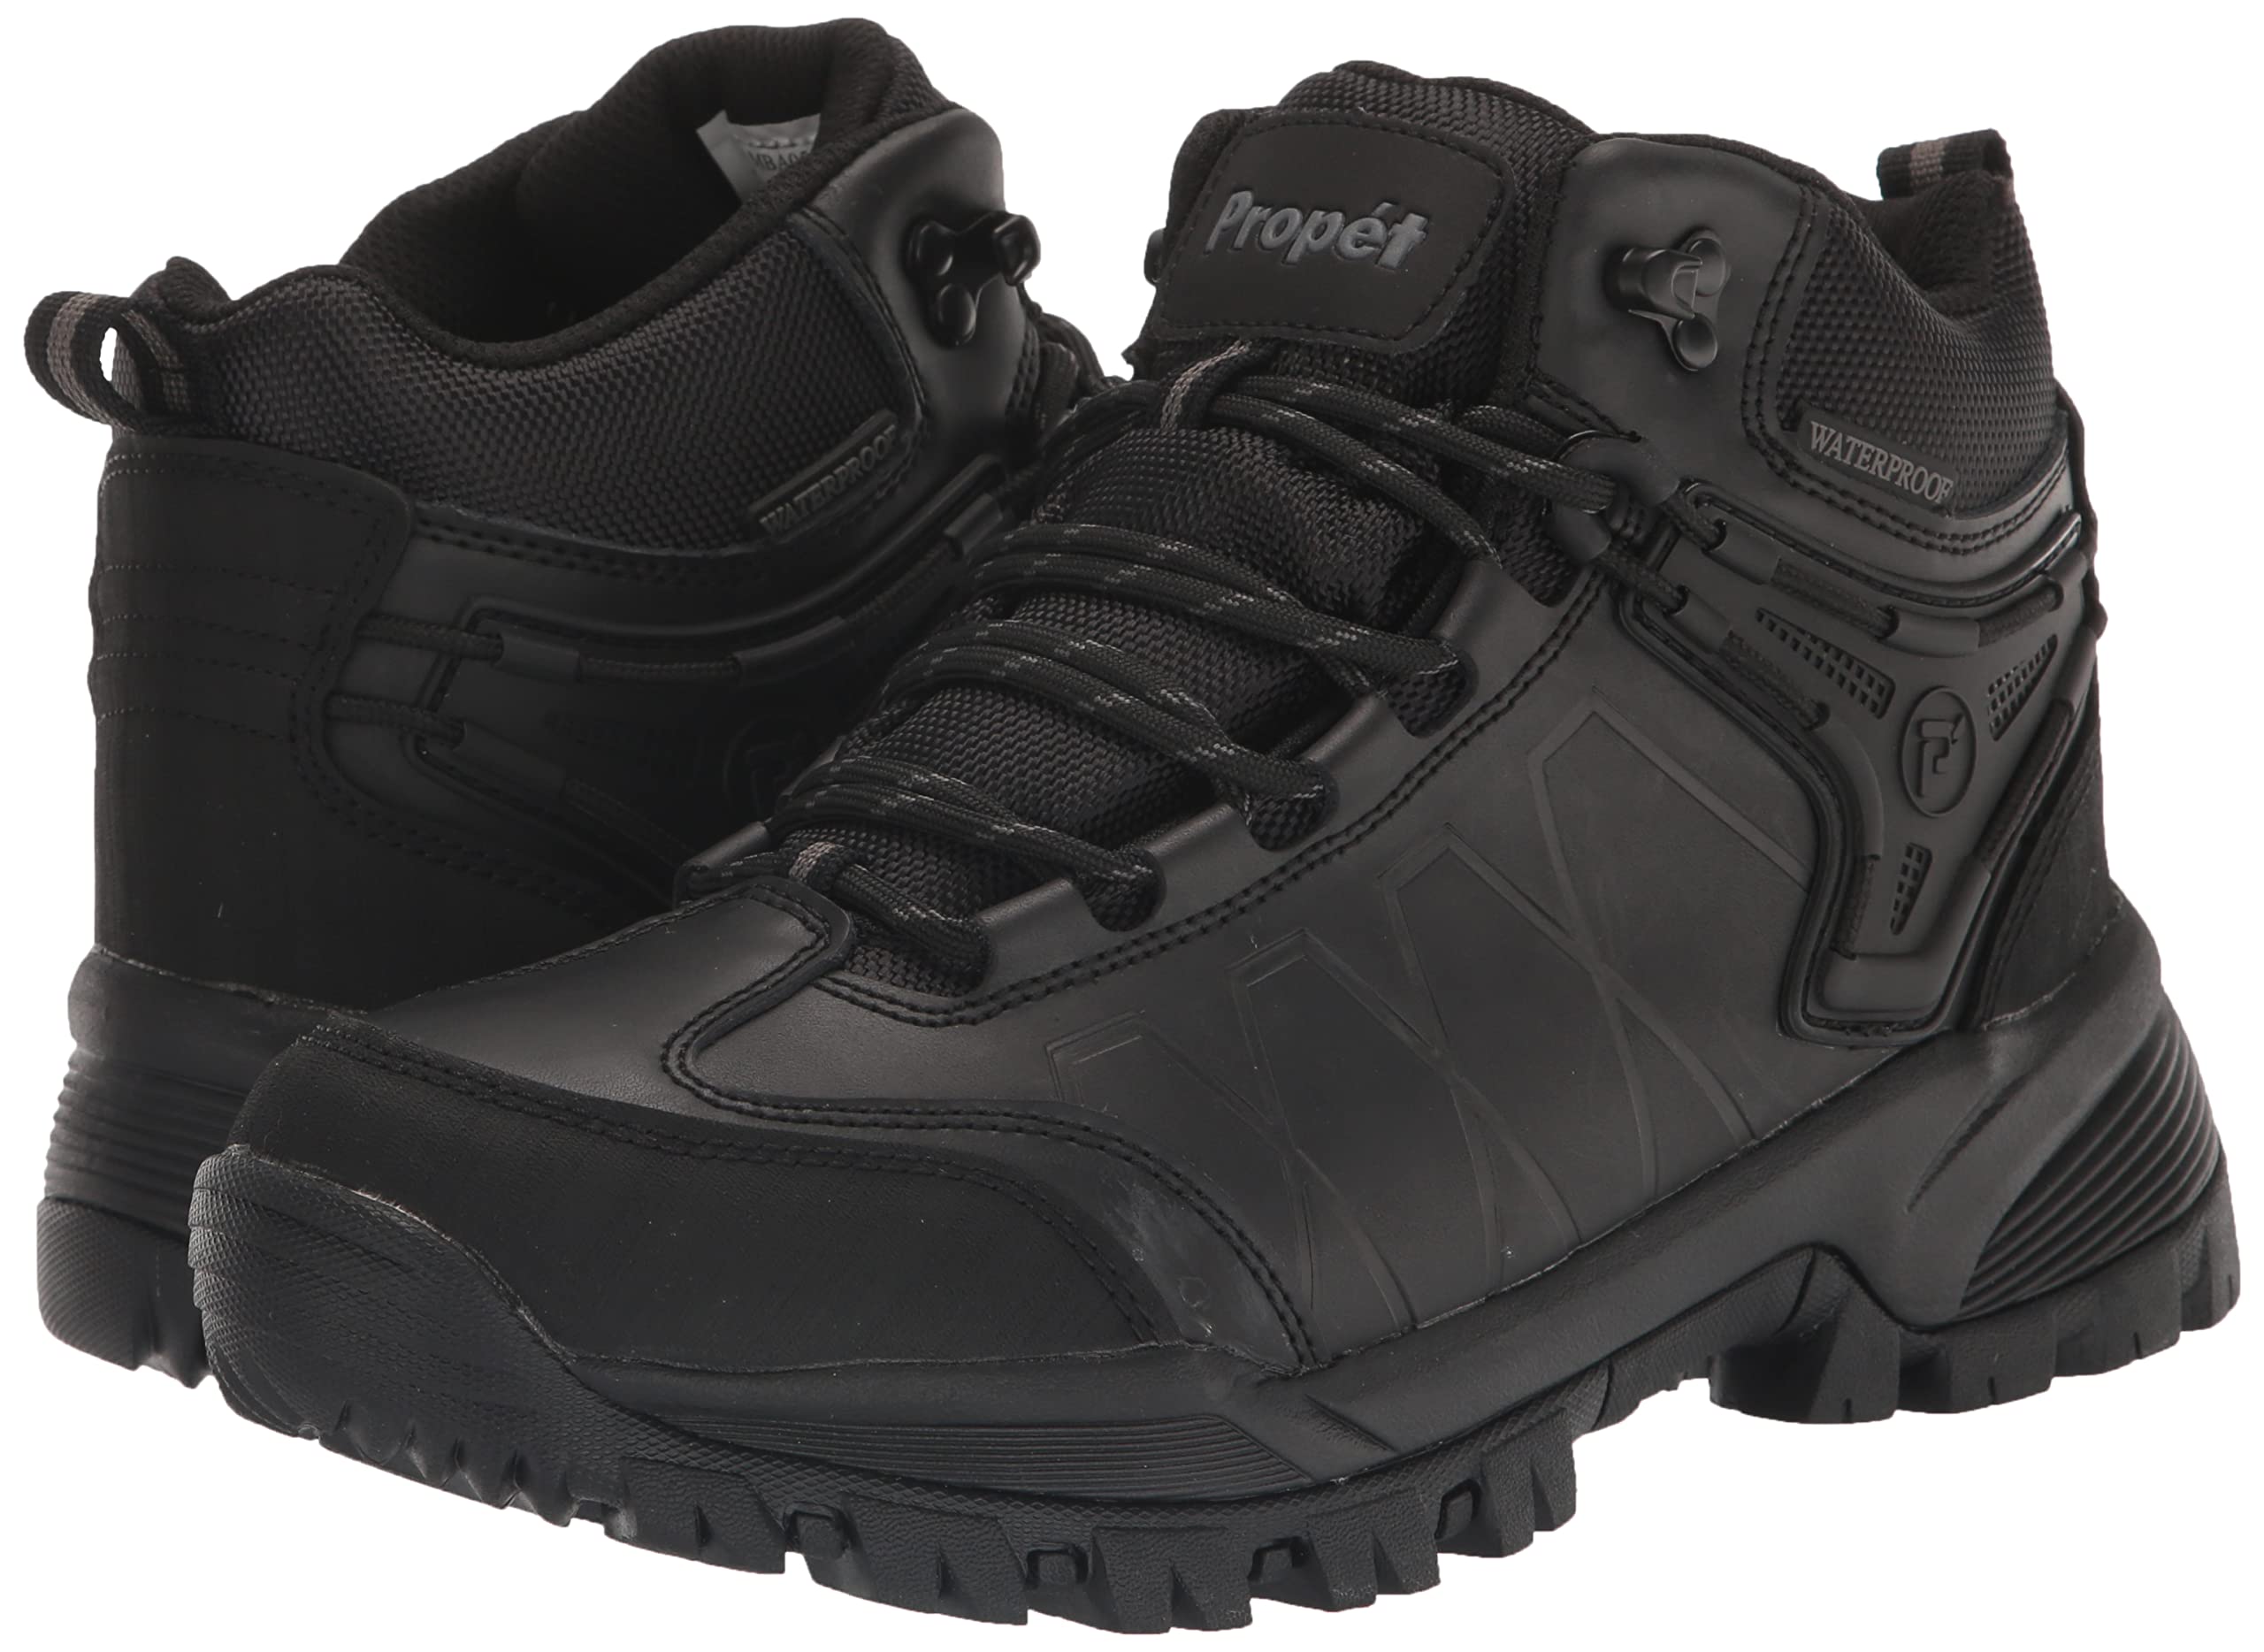 Propet Mens Ridge Walker Force Round Toe Hiking Hiking Casual Boots Ankle - Black